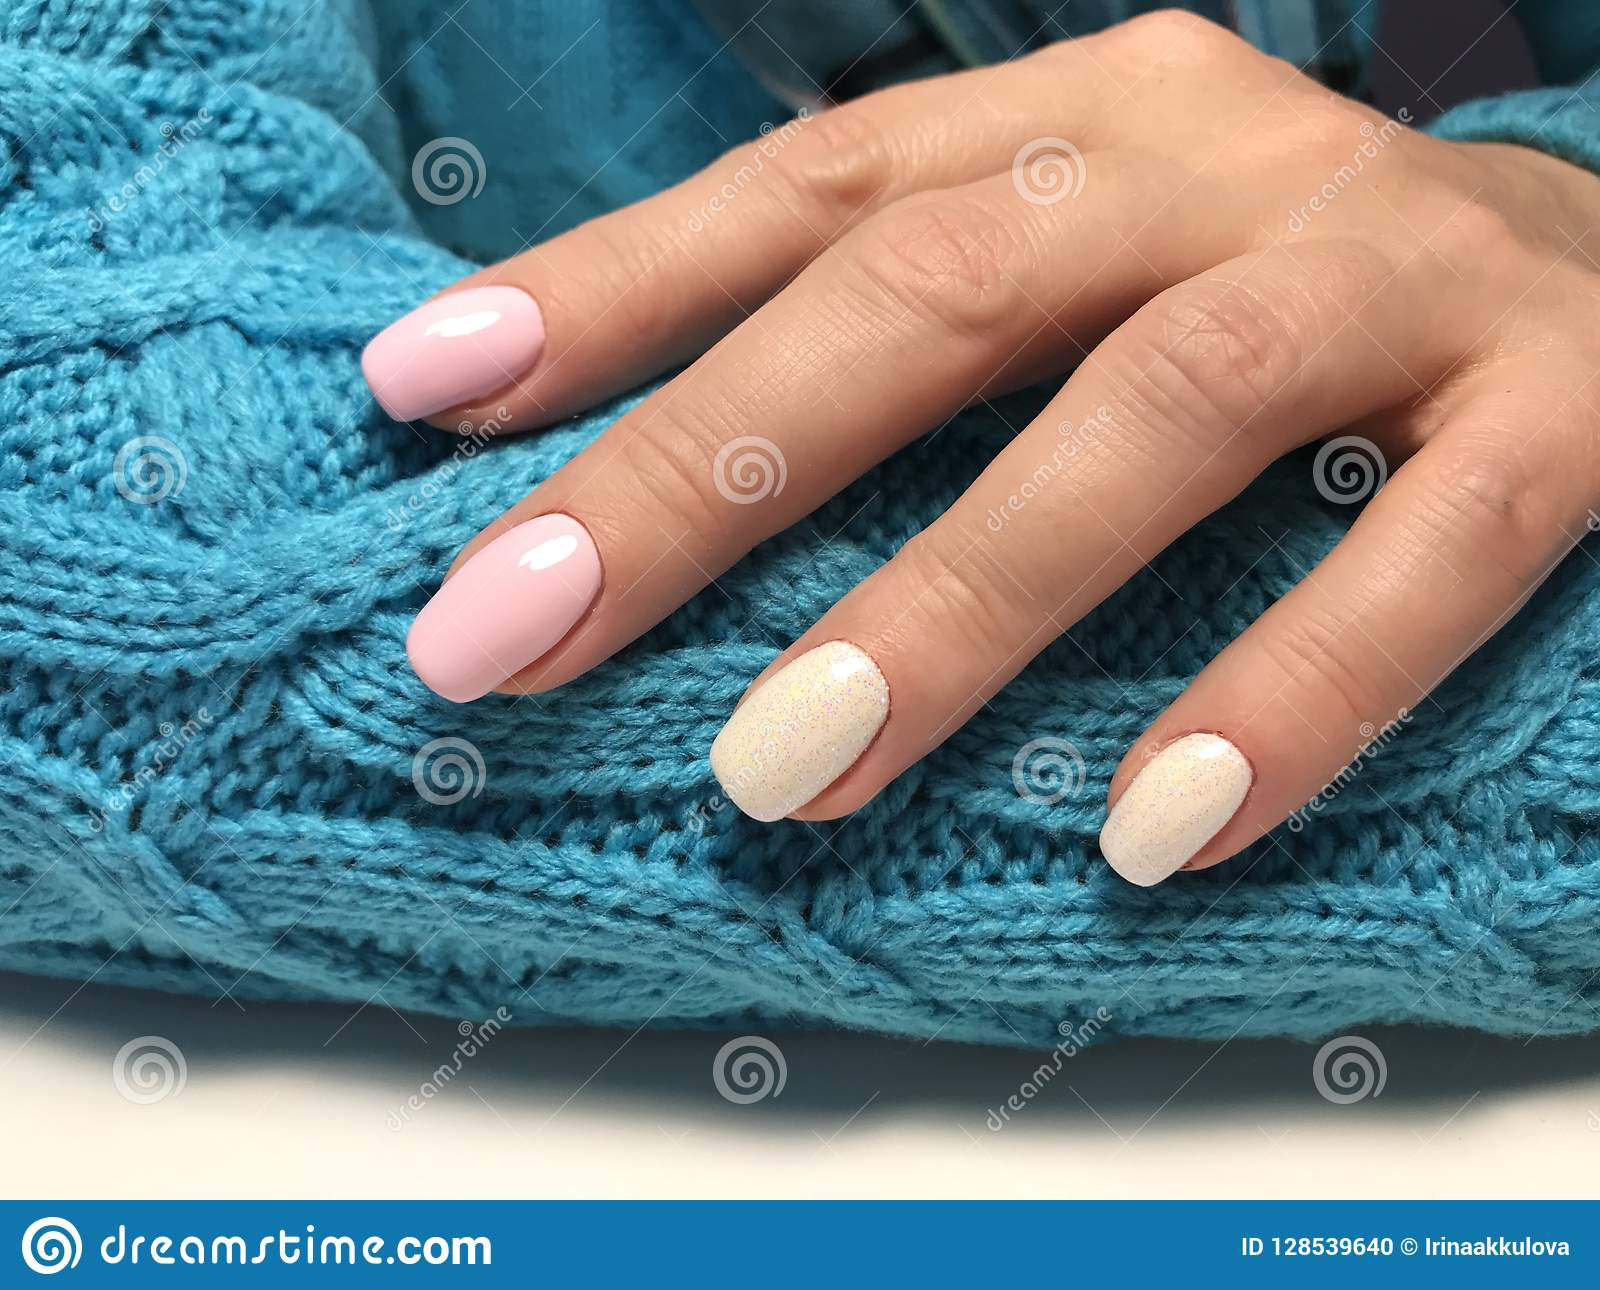 Sweater Nail Art
 Sweater and nails stock photo Image of nails hands